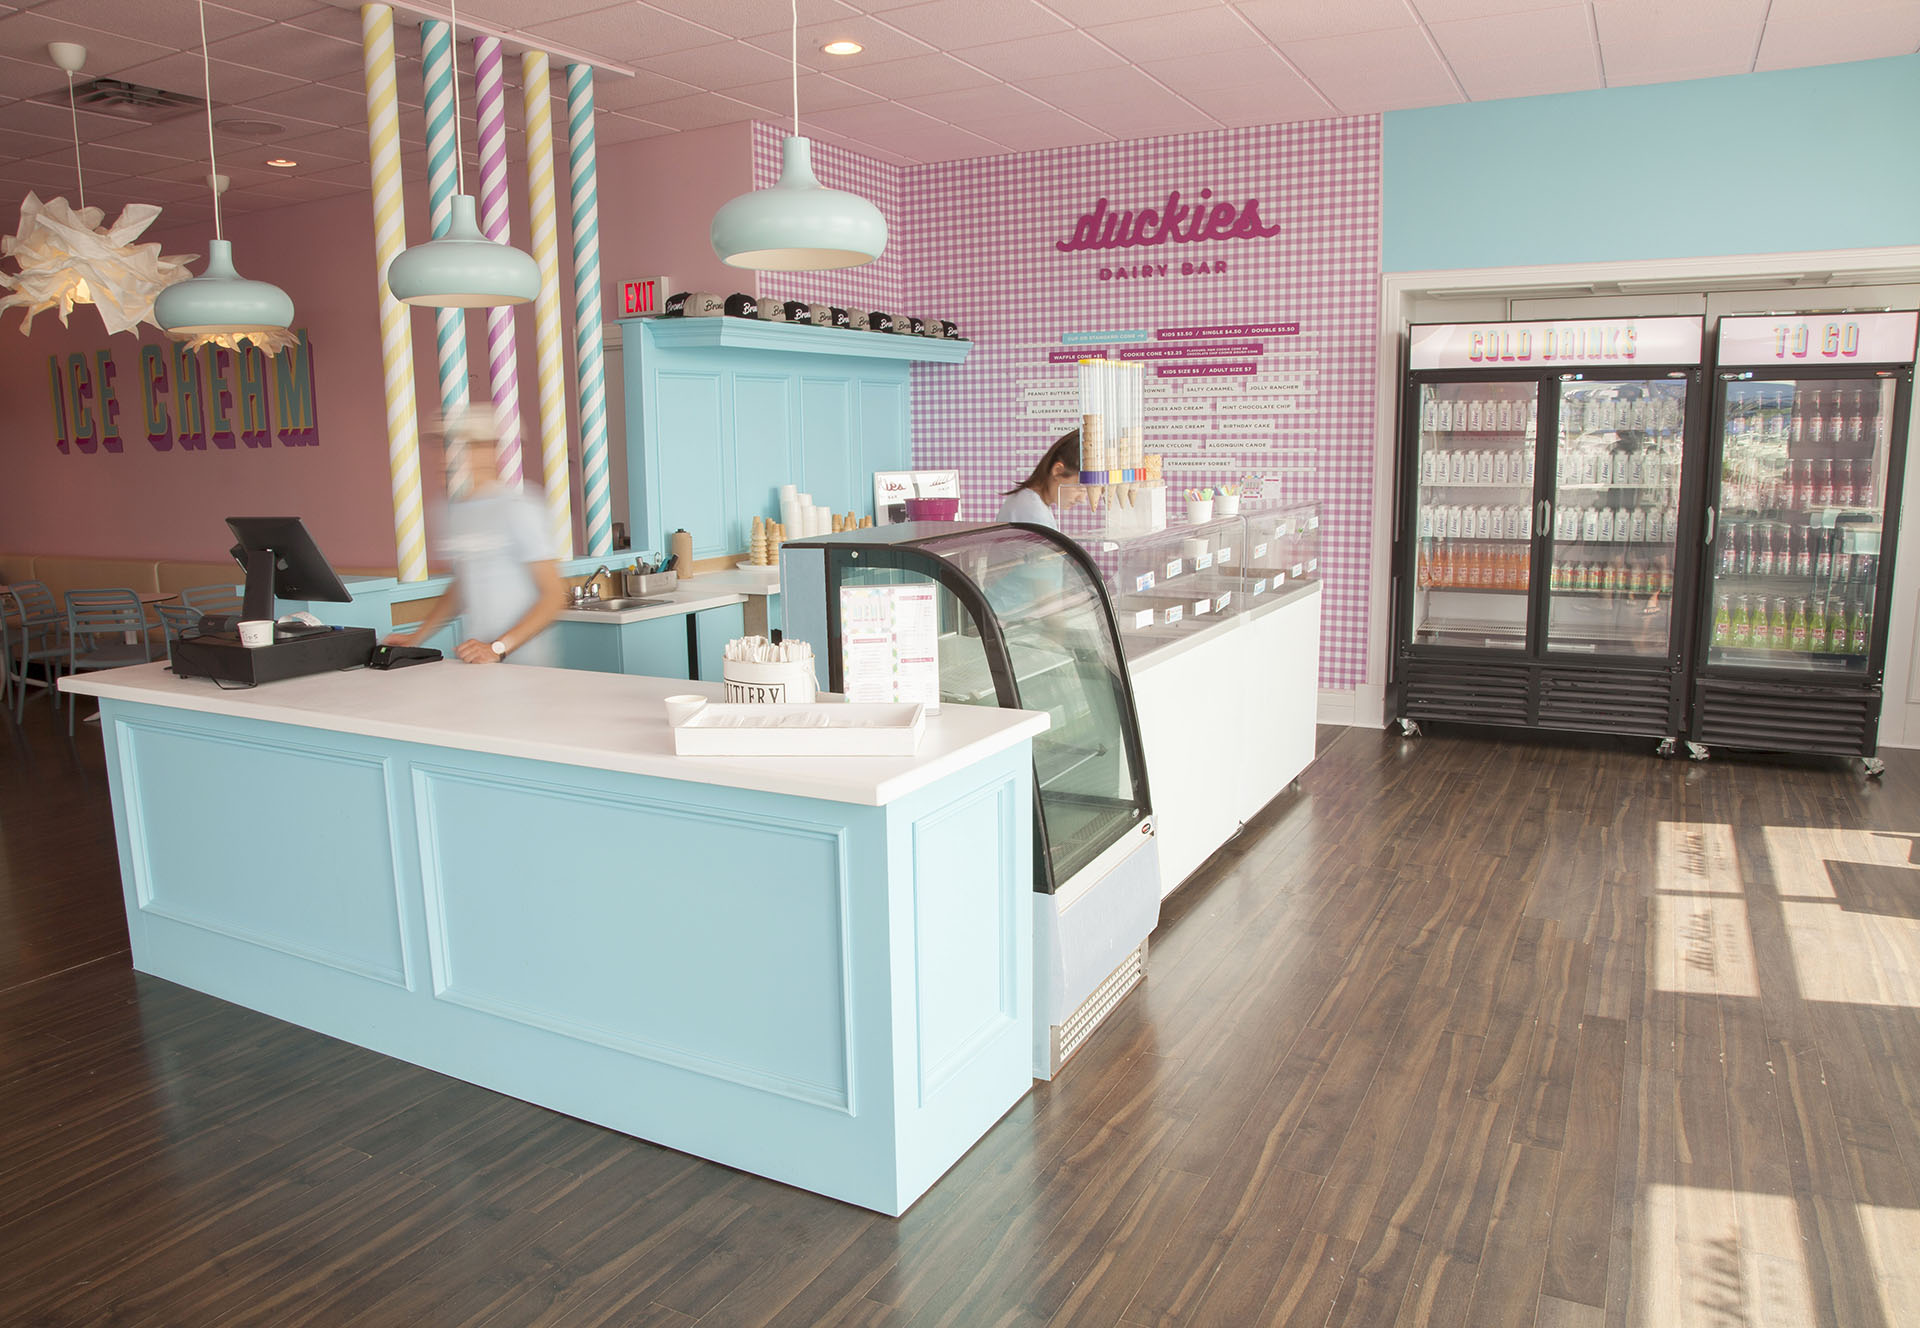 Interior of Duckies Dairy Bar with counter and cash register, and refrigerator with cold drinks.